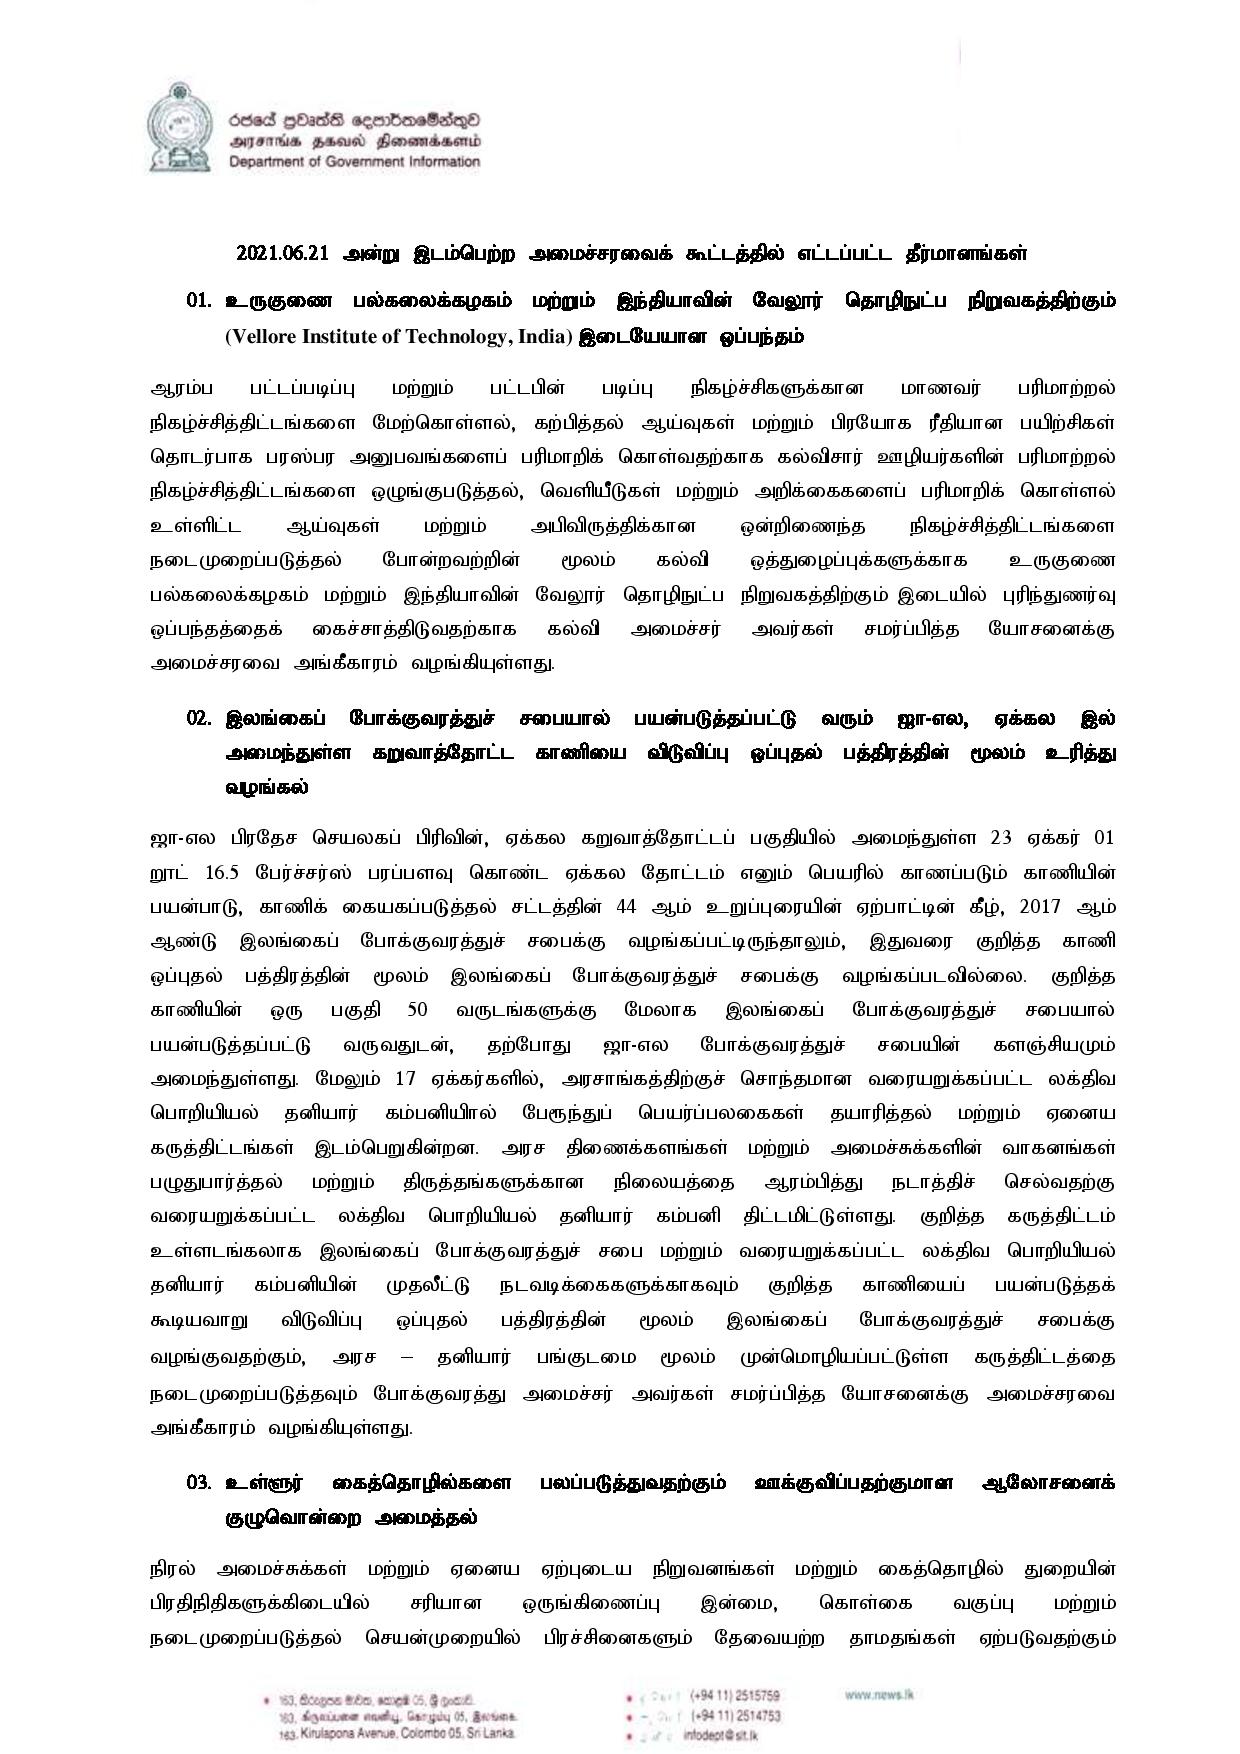 Cabinet Decisions on 21.06.2021 Tamil page 001 1